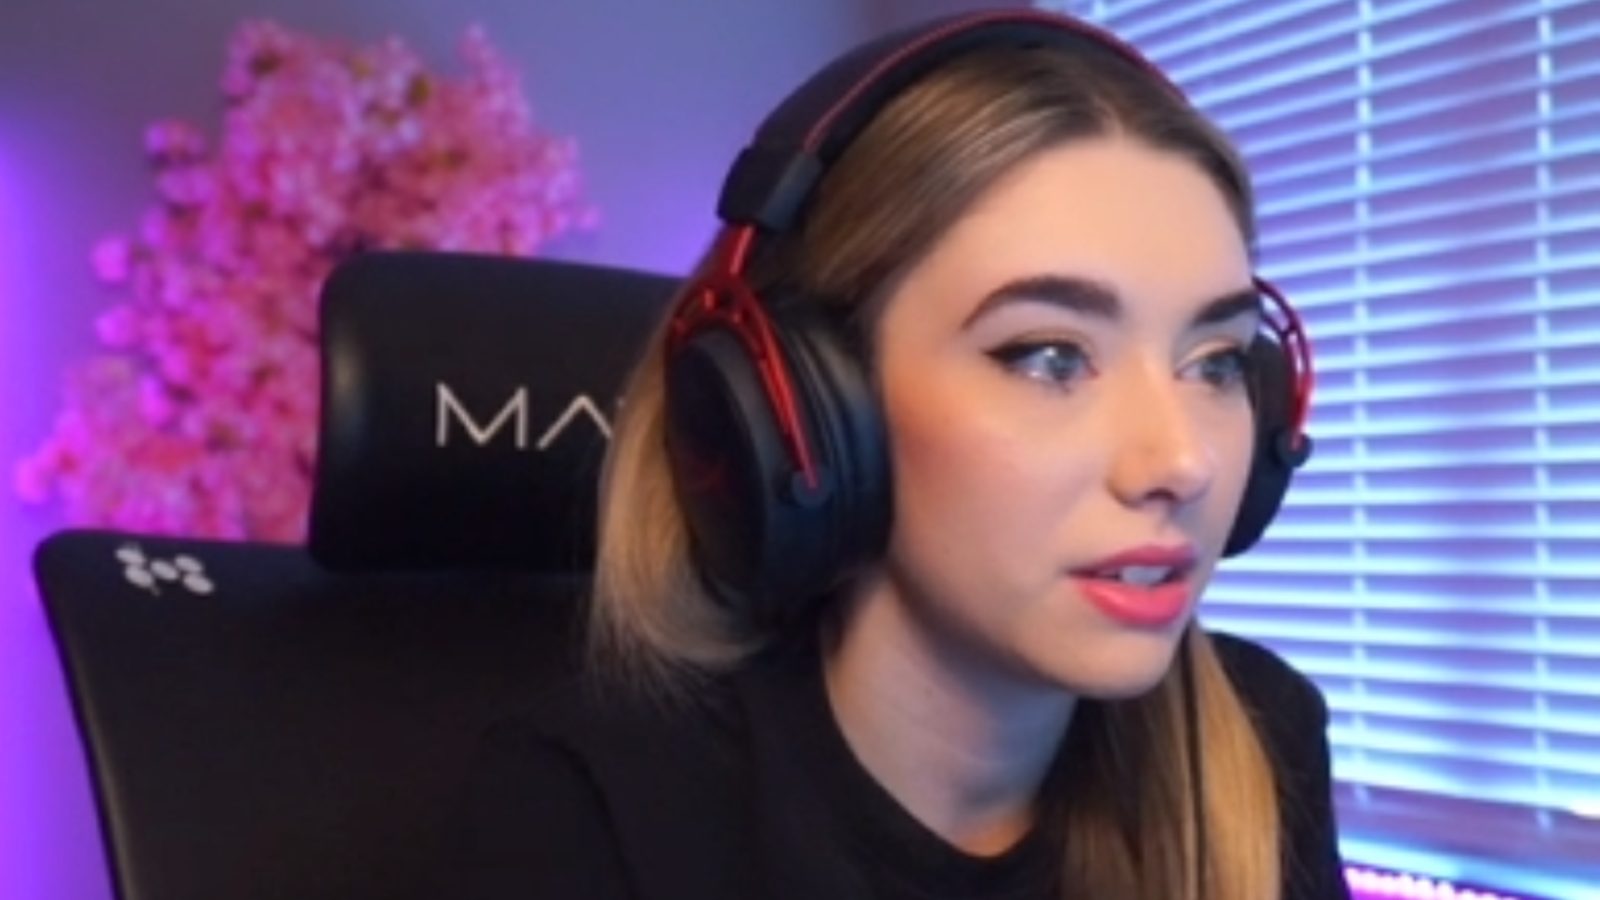 Twitch streamer breaks down crying after chat says she doesn’t stream ...